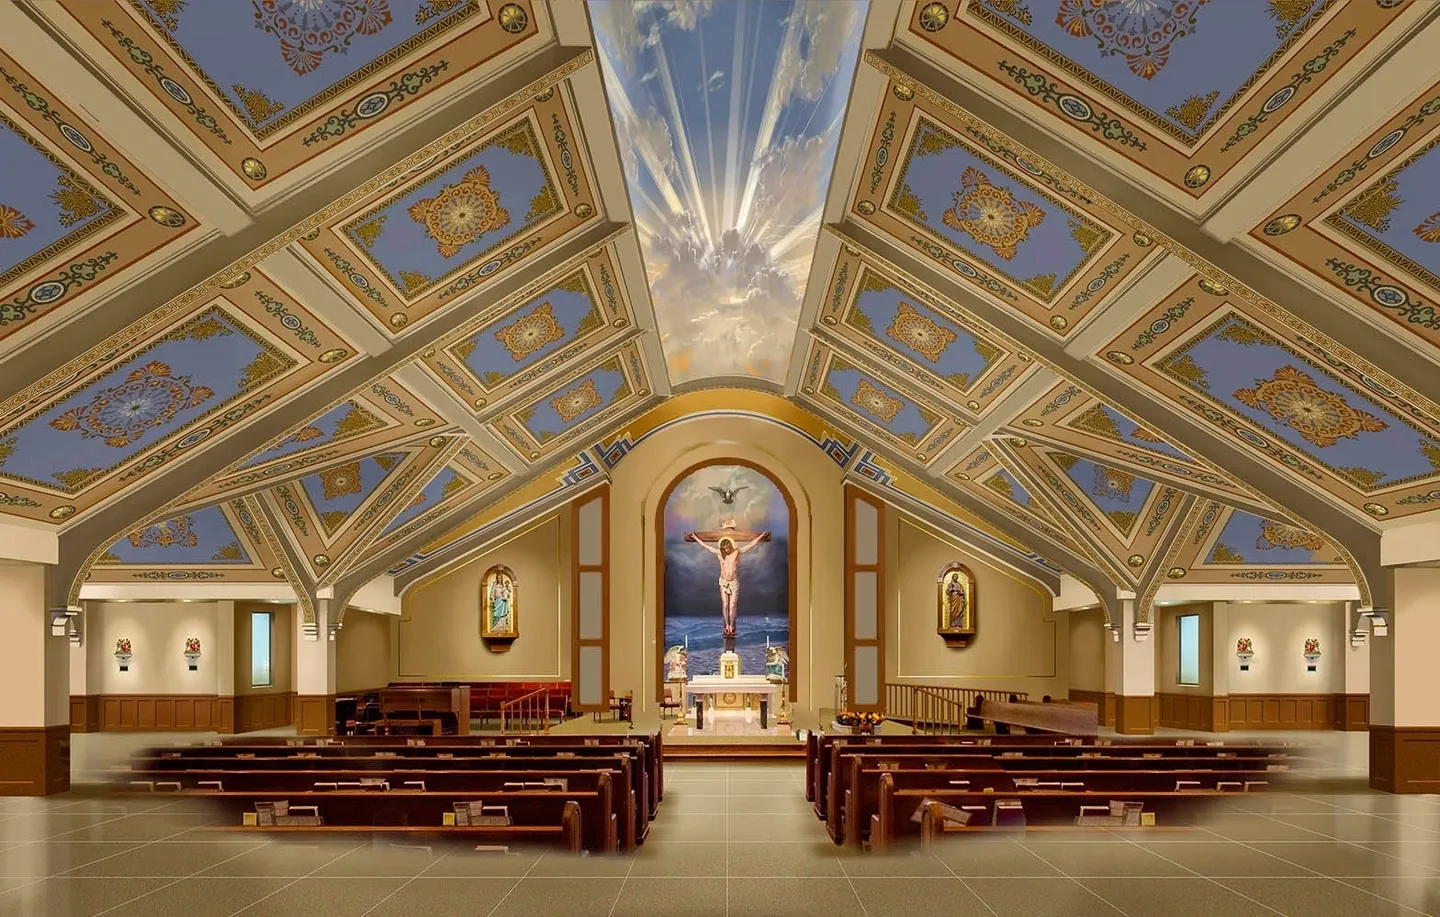 A large church with many pews and paintings on the ceiling.